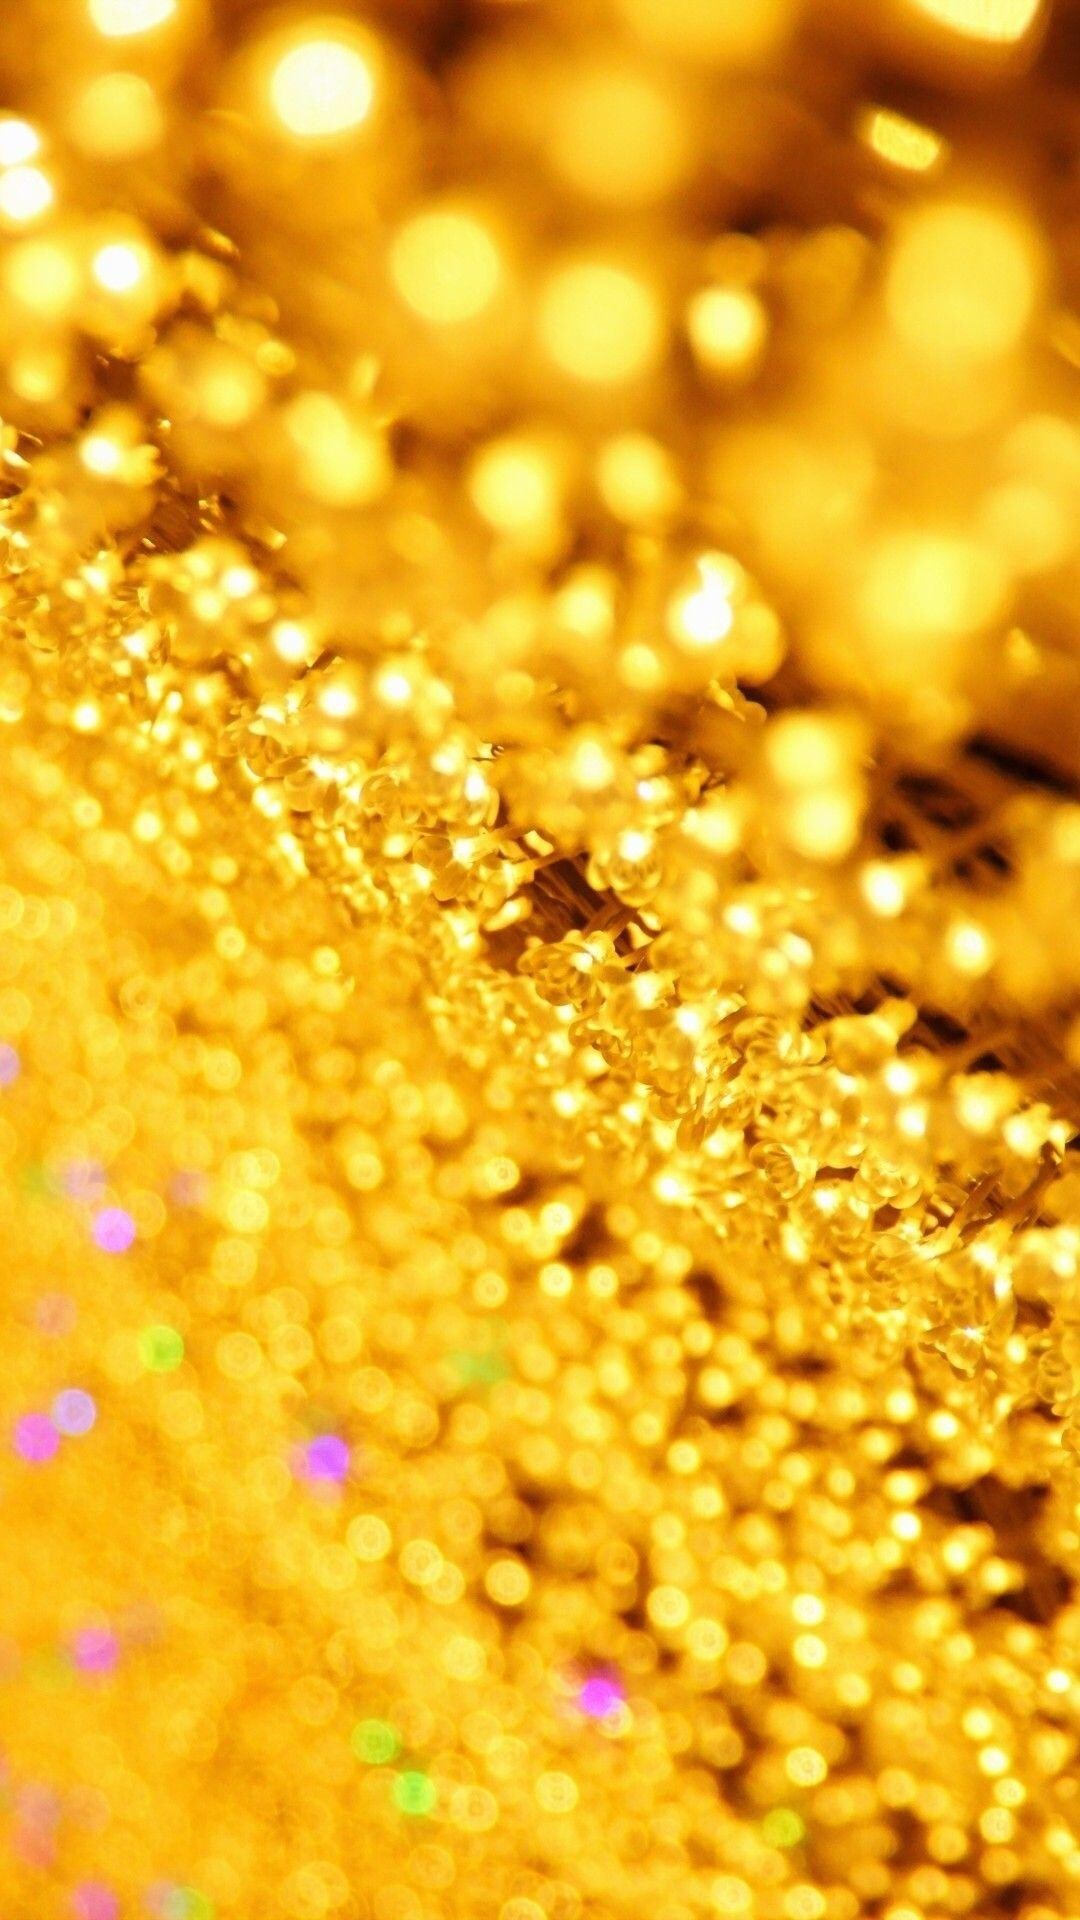 HD wallpaper, Luxurious Aesthetics, Shimmering Backdrop, Glitter Gold Wallpapers, Sparkling Bling, Samsung 1080P Gold Glitter Background Photo, 1080X1920 Full Hd Phone